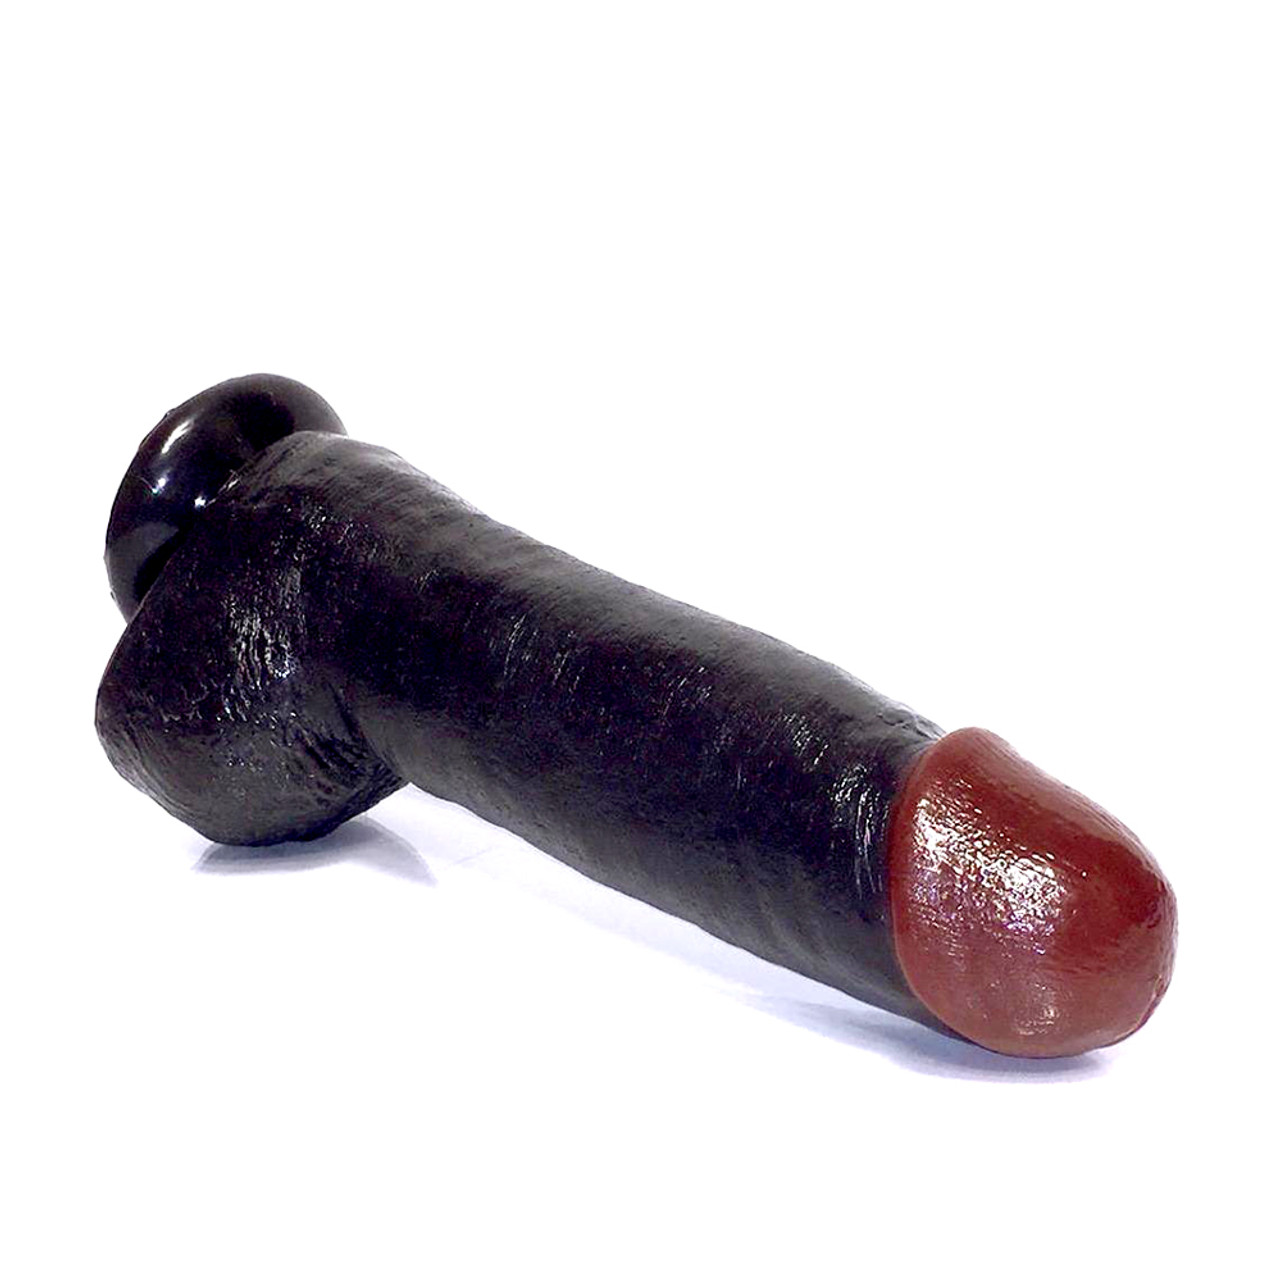 Buy the Chi Chi Larues Black Balled 12 inch Realistic Dildo with Suction Cup BBC Dong